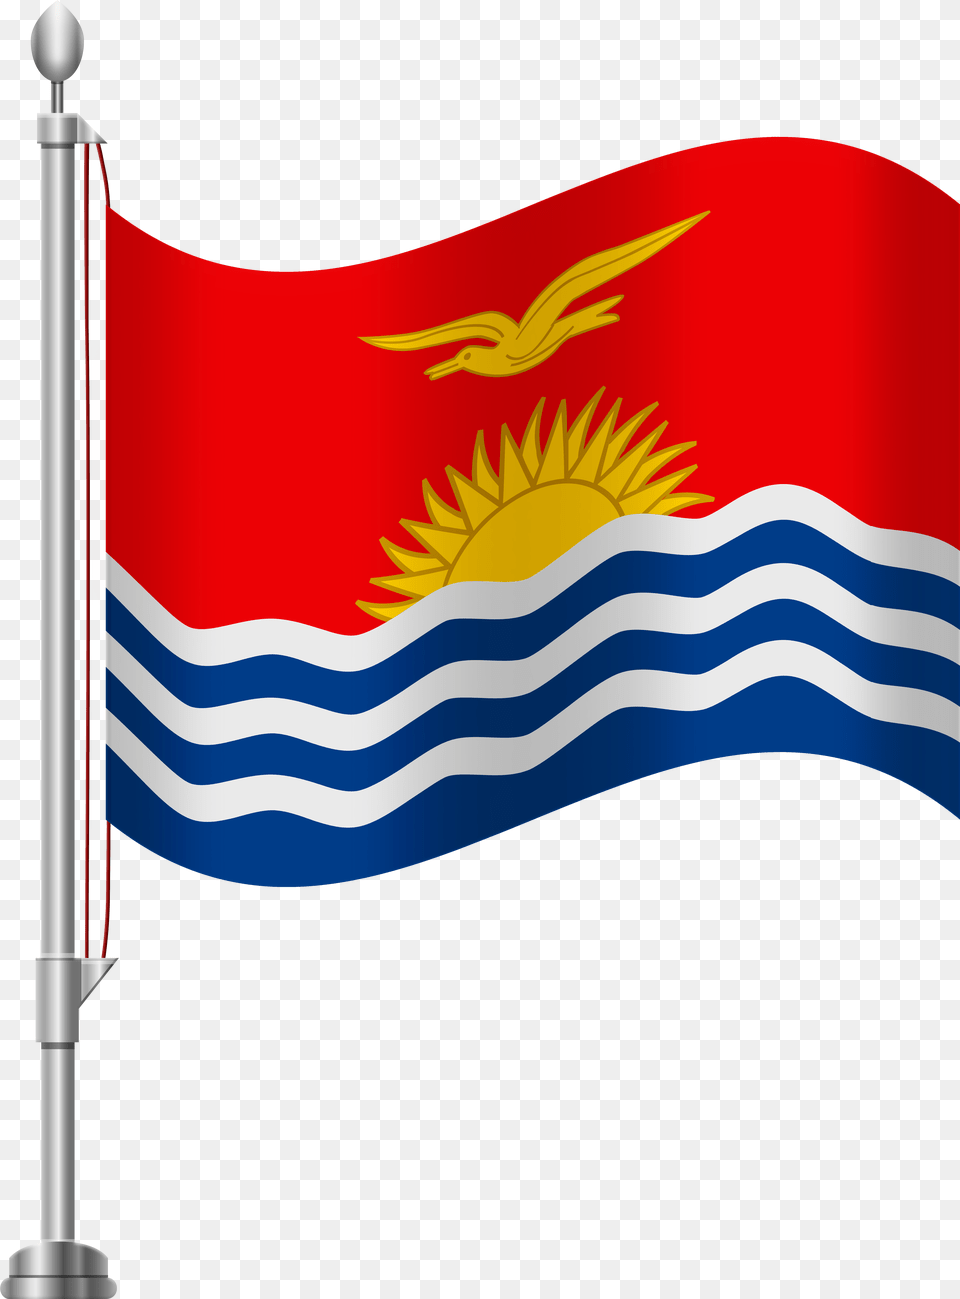 Transparent Telephone Pole Clipart Costa Rica Flag Png Image